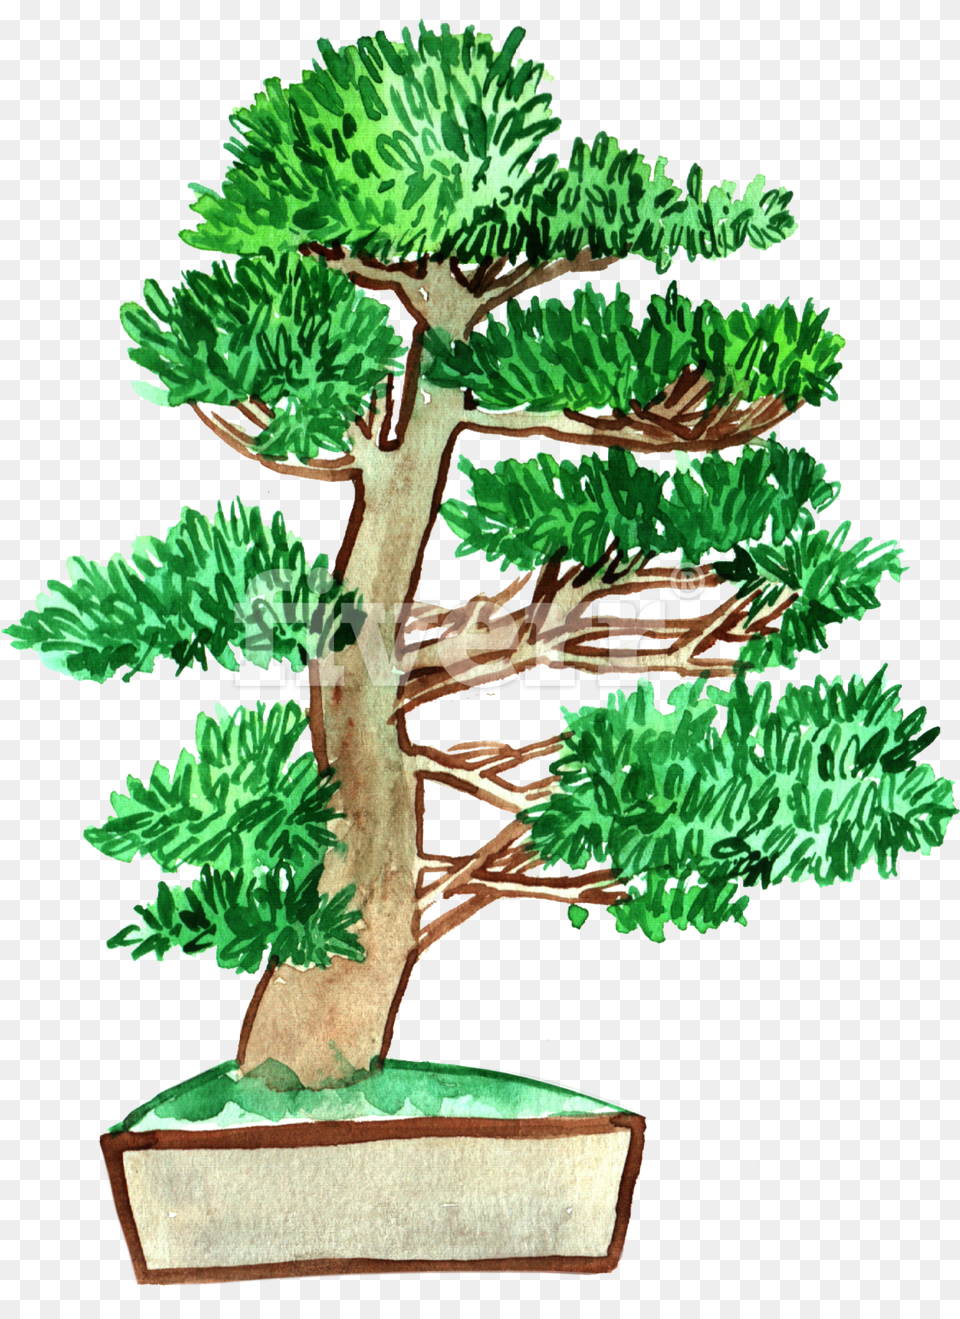 Future Trunks, Plant, Potted Plant, Tree, Conifer Png